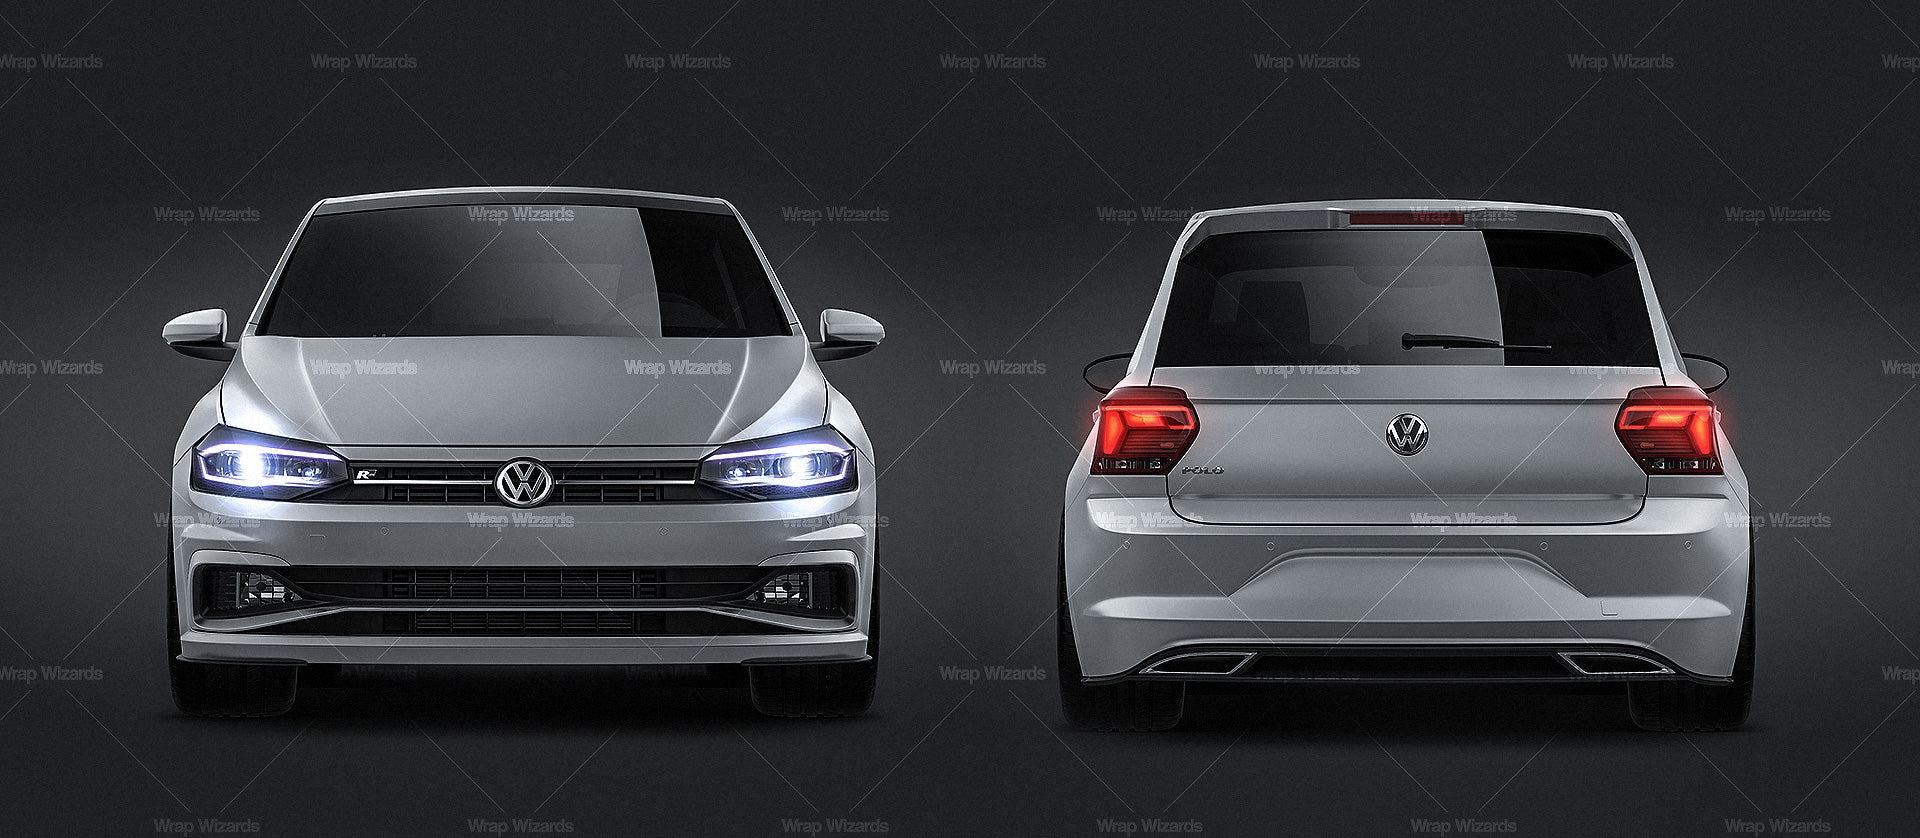 VW Polo R Line Adds Show Without the Go